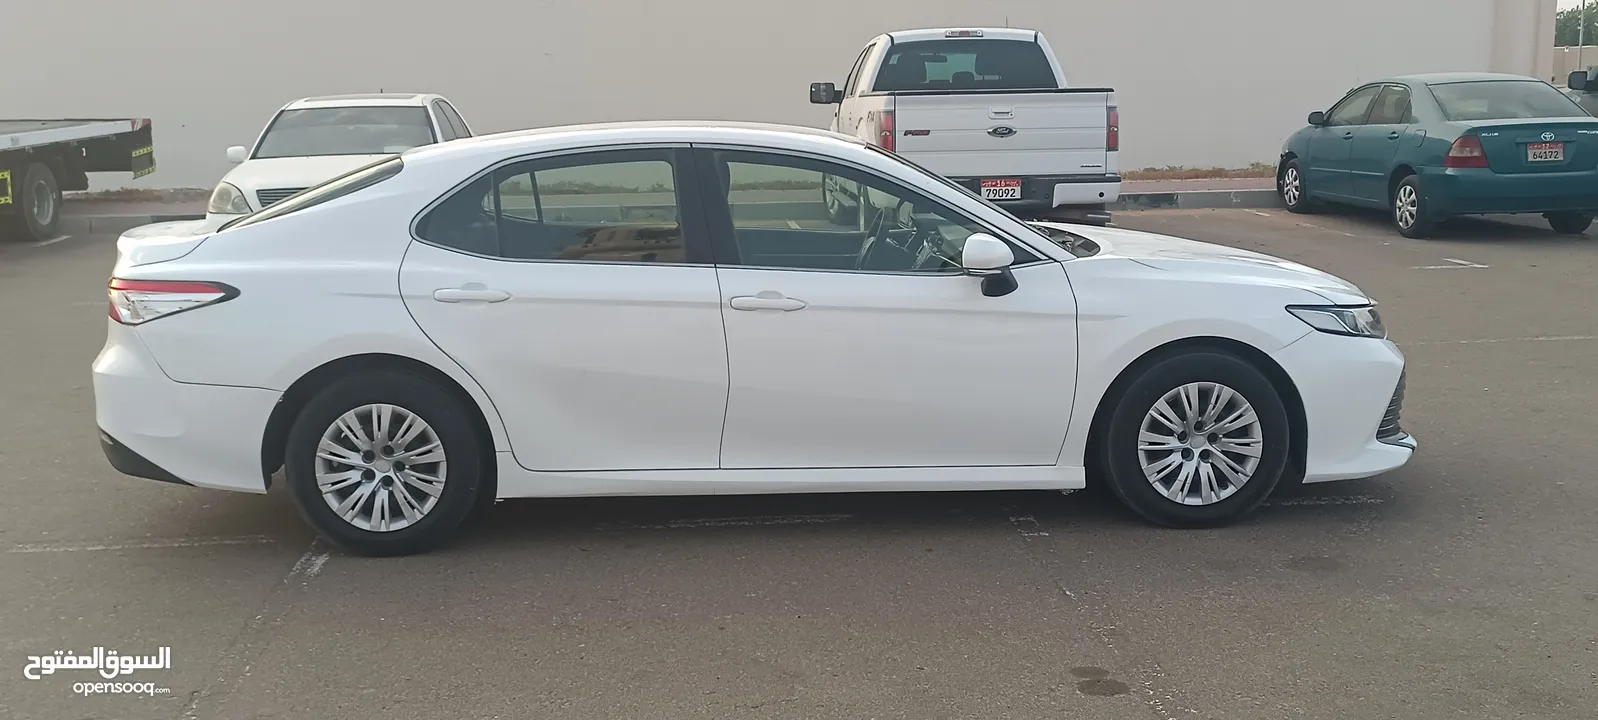 Toyota Camry model 2018 for sale GCC